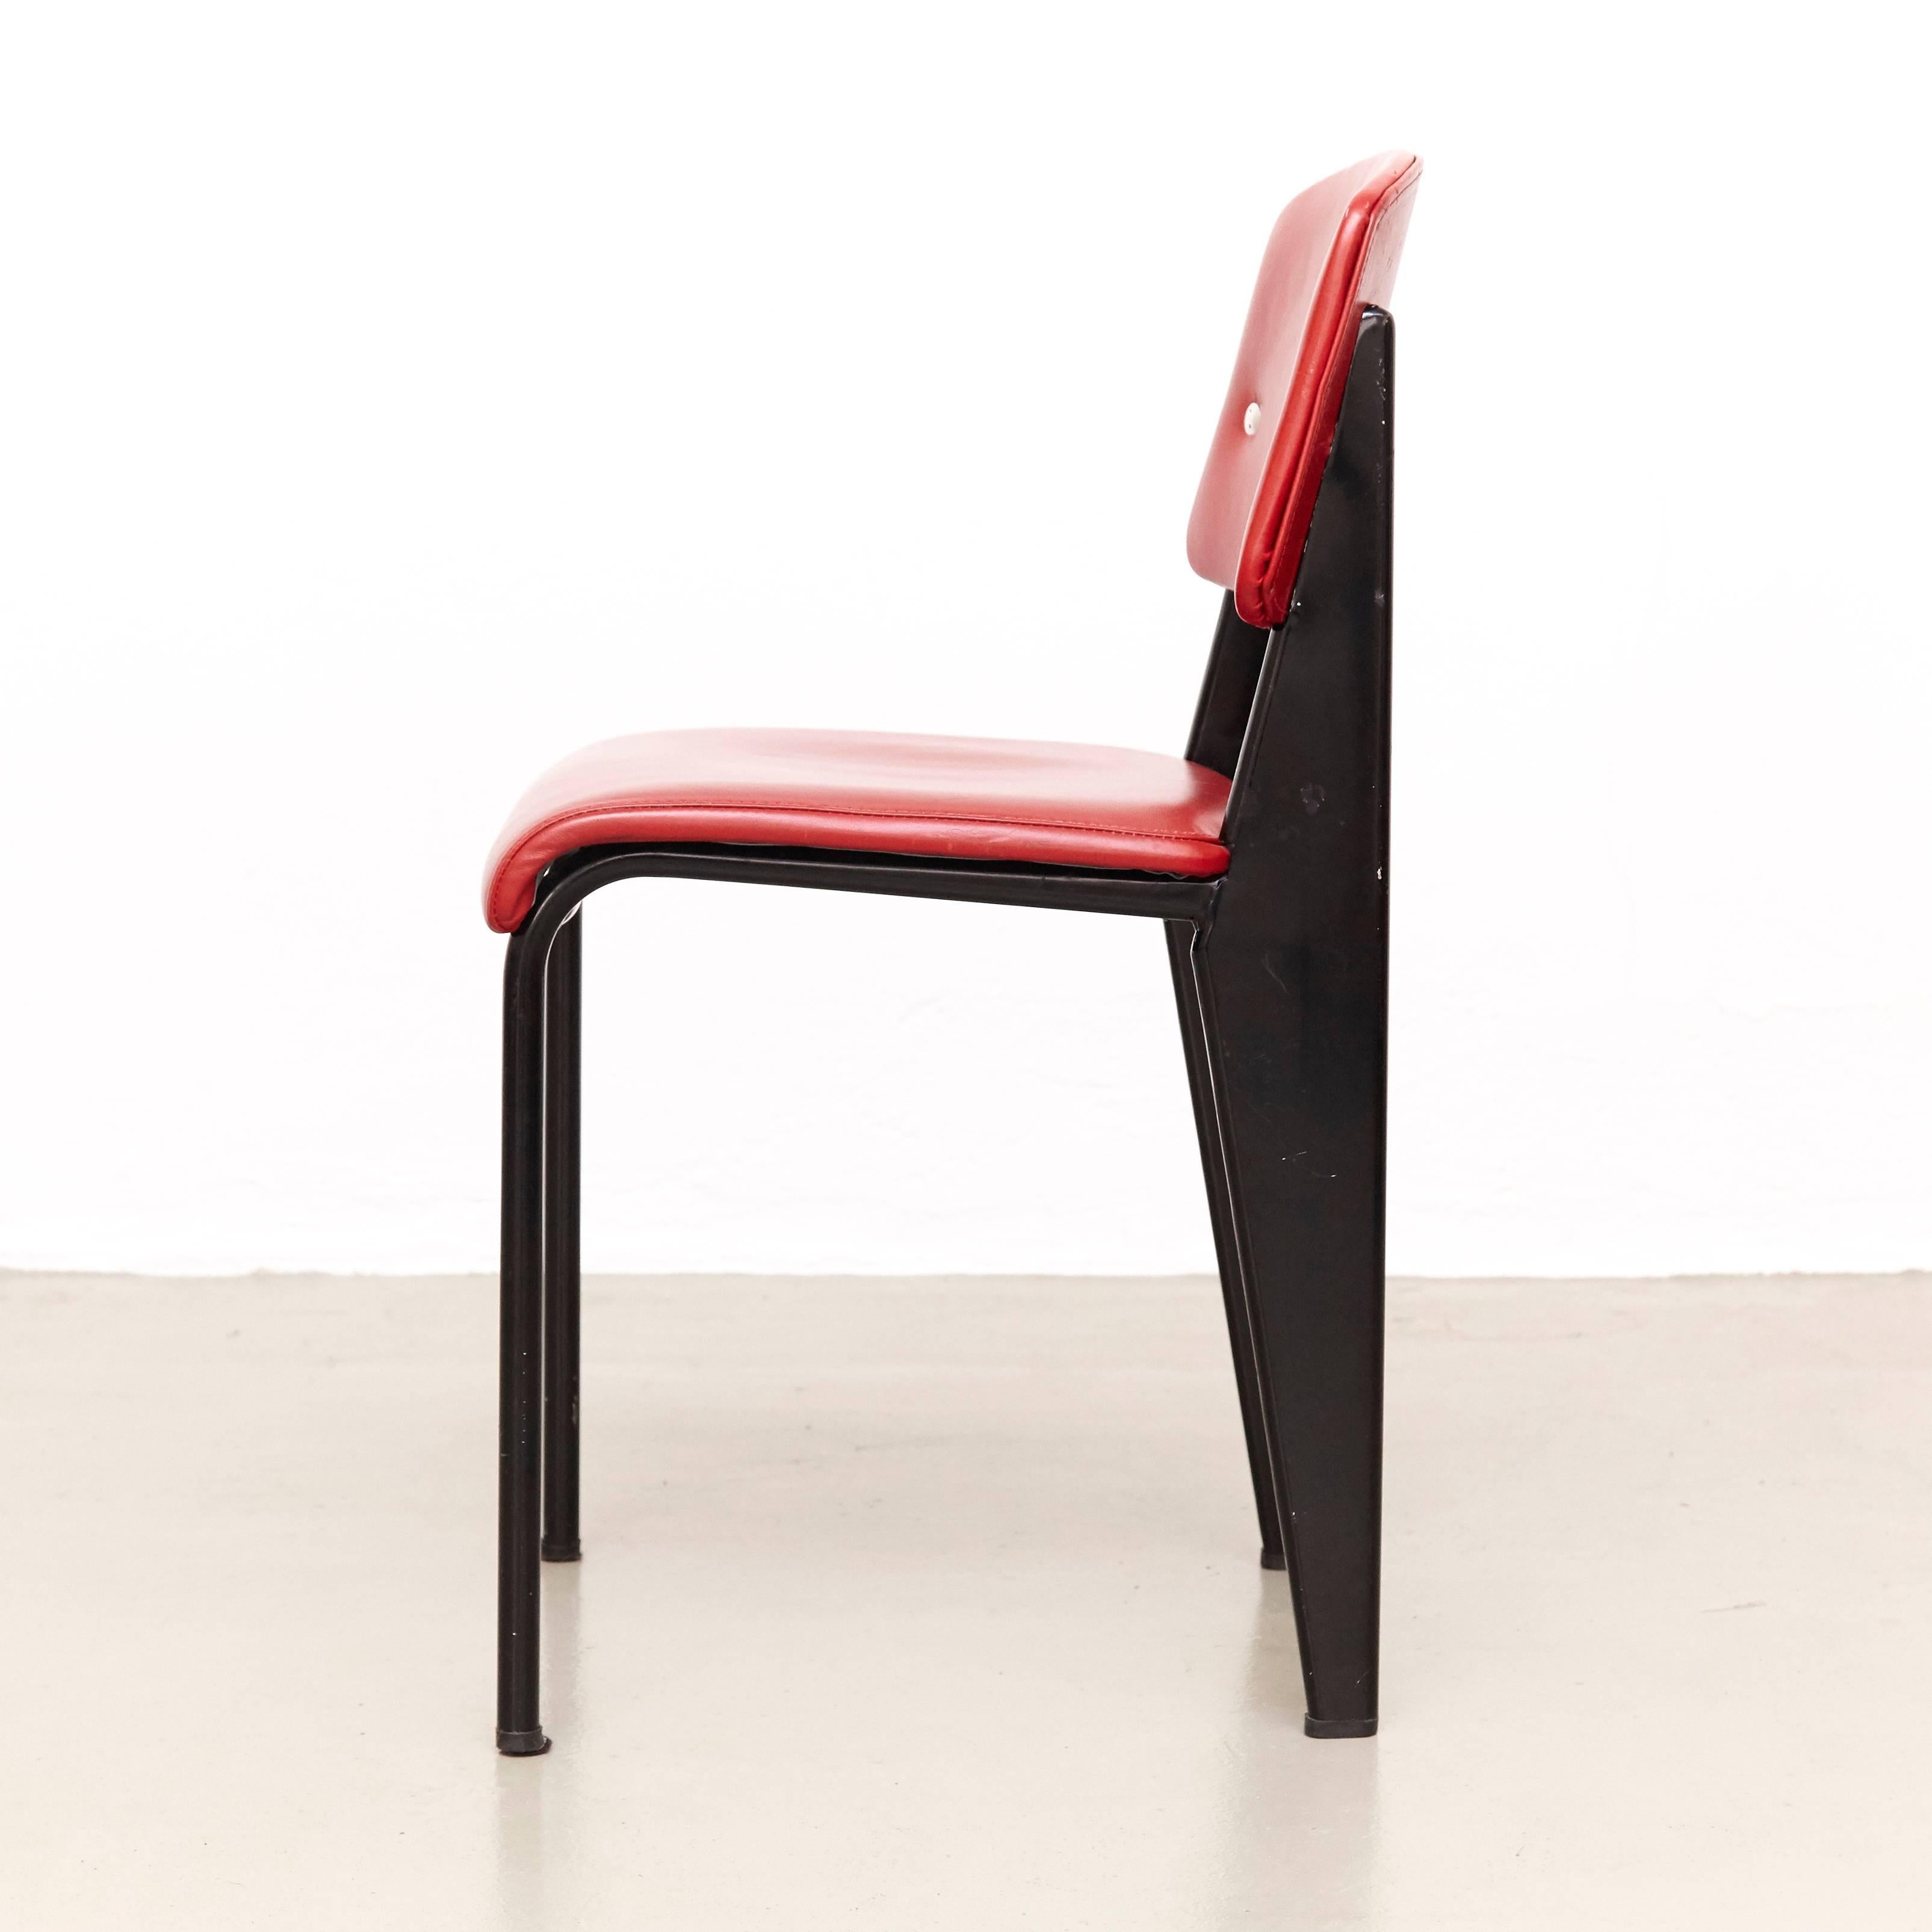 Mid-20th Century Jean Prouvé Mid-Century Modern Red Upholstered Standard Chair, circa 1950